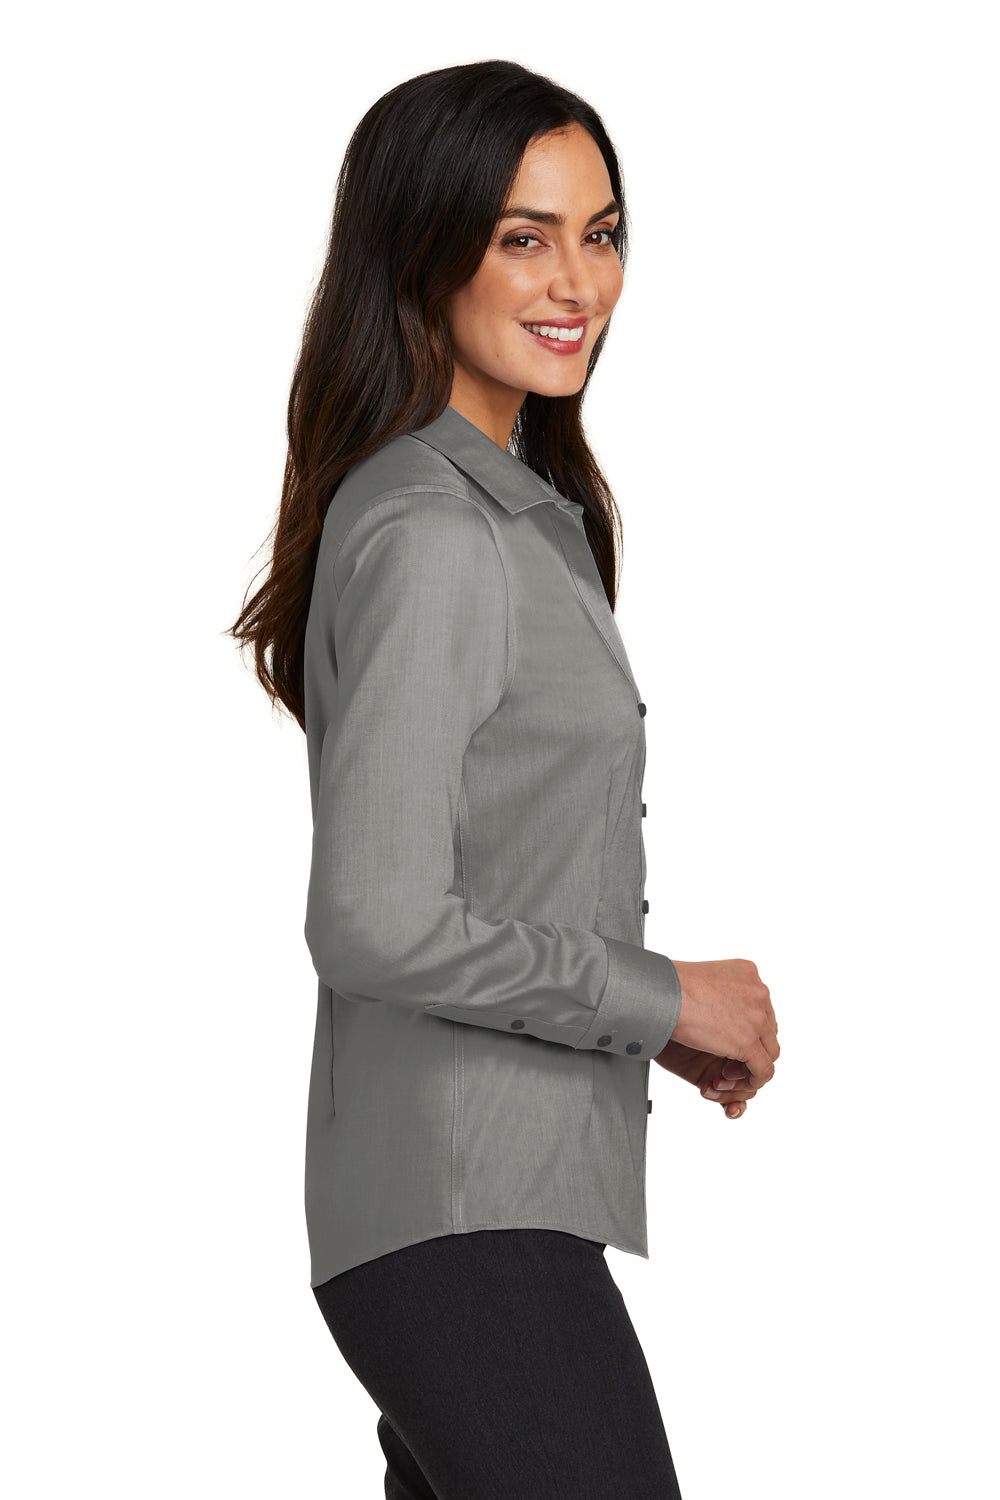 Red House RH250 Womens Pinpoint Oxford Wrinkle Resistant Long Sleeve Button Down Shirt Charcoal Grey Side